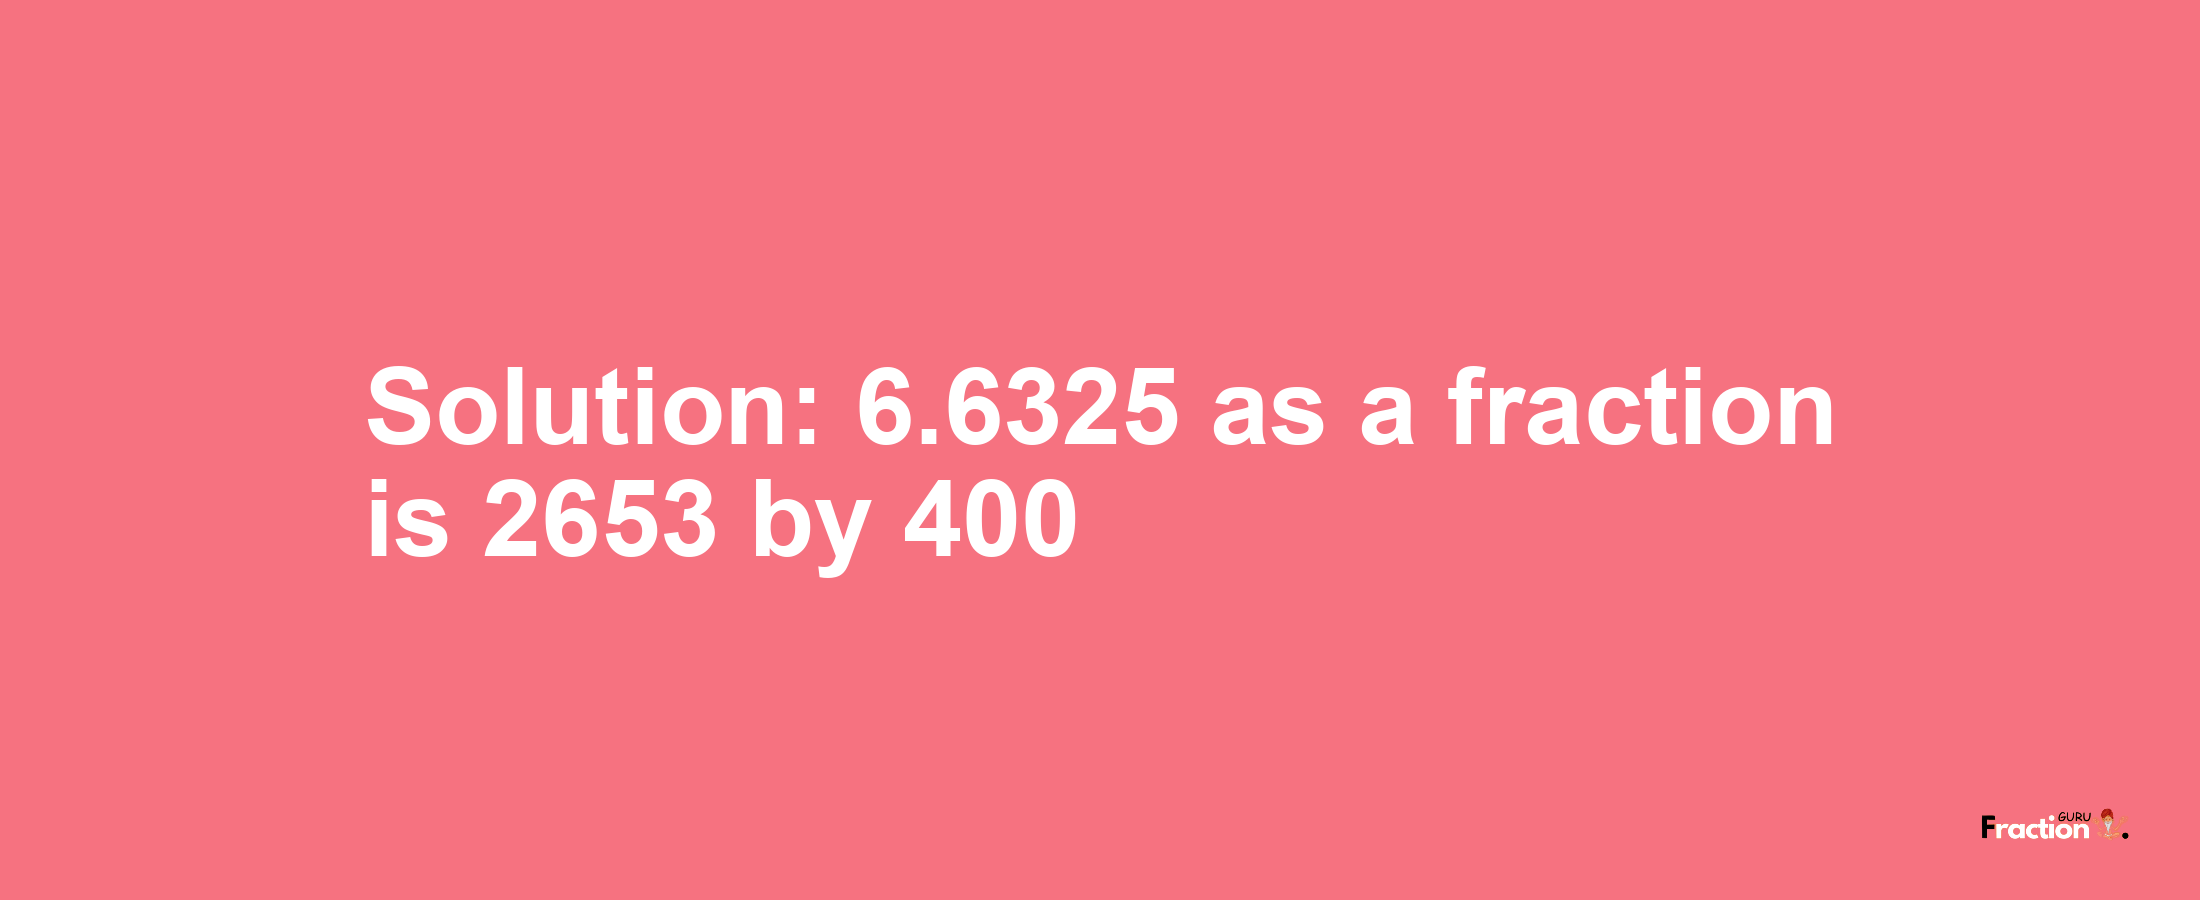 Solution:6.6325 as a fraction is 2653/400